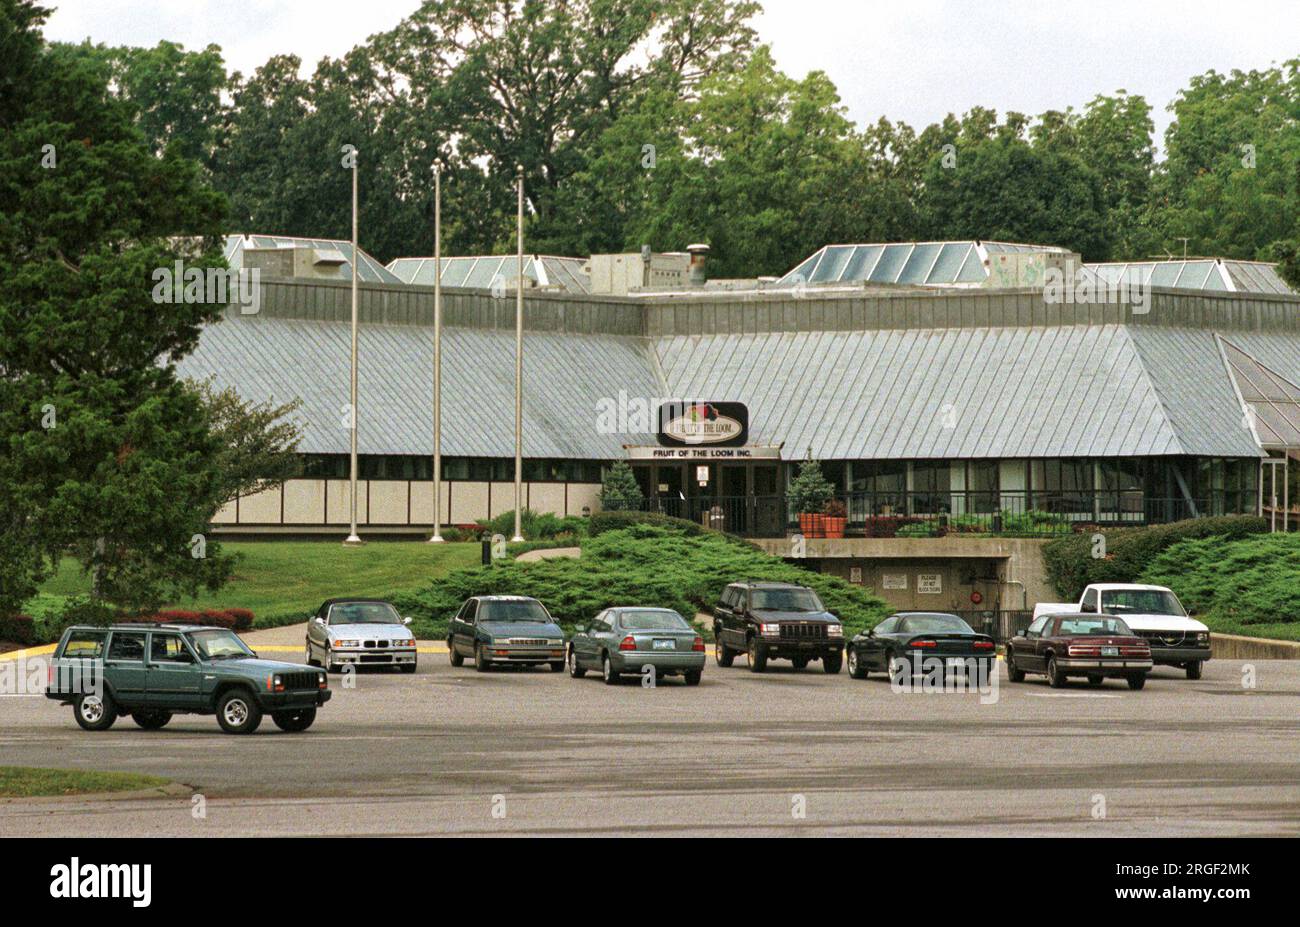 Fruit of the Loom Inc. operational headquarters, seen here on Sunday, Aug. 9, 1998 in Bowling Green, Warren County, KY, USA. One of the world's largest manufacturers of underwear, T-shirts and activewear with brands including Fruit of the Loom, BVD, Gitano and Munsingwear, Fruit of the Loom closed 11 U.S. plants and laid off more than 7,000 workers in 1997, followed by laying off another 812 workers and closing its Campbellsville, KY, textile and apparel plant in June 1998; approximately 100 Campbellsville employees were offered jobs in Jamestown, KY. (Apex MediaWire Photo by Billy Suratt) Stock Photo